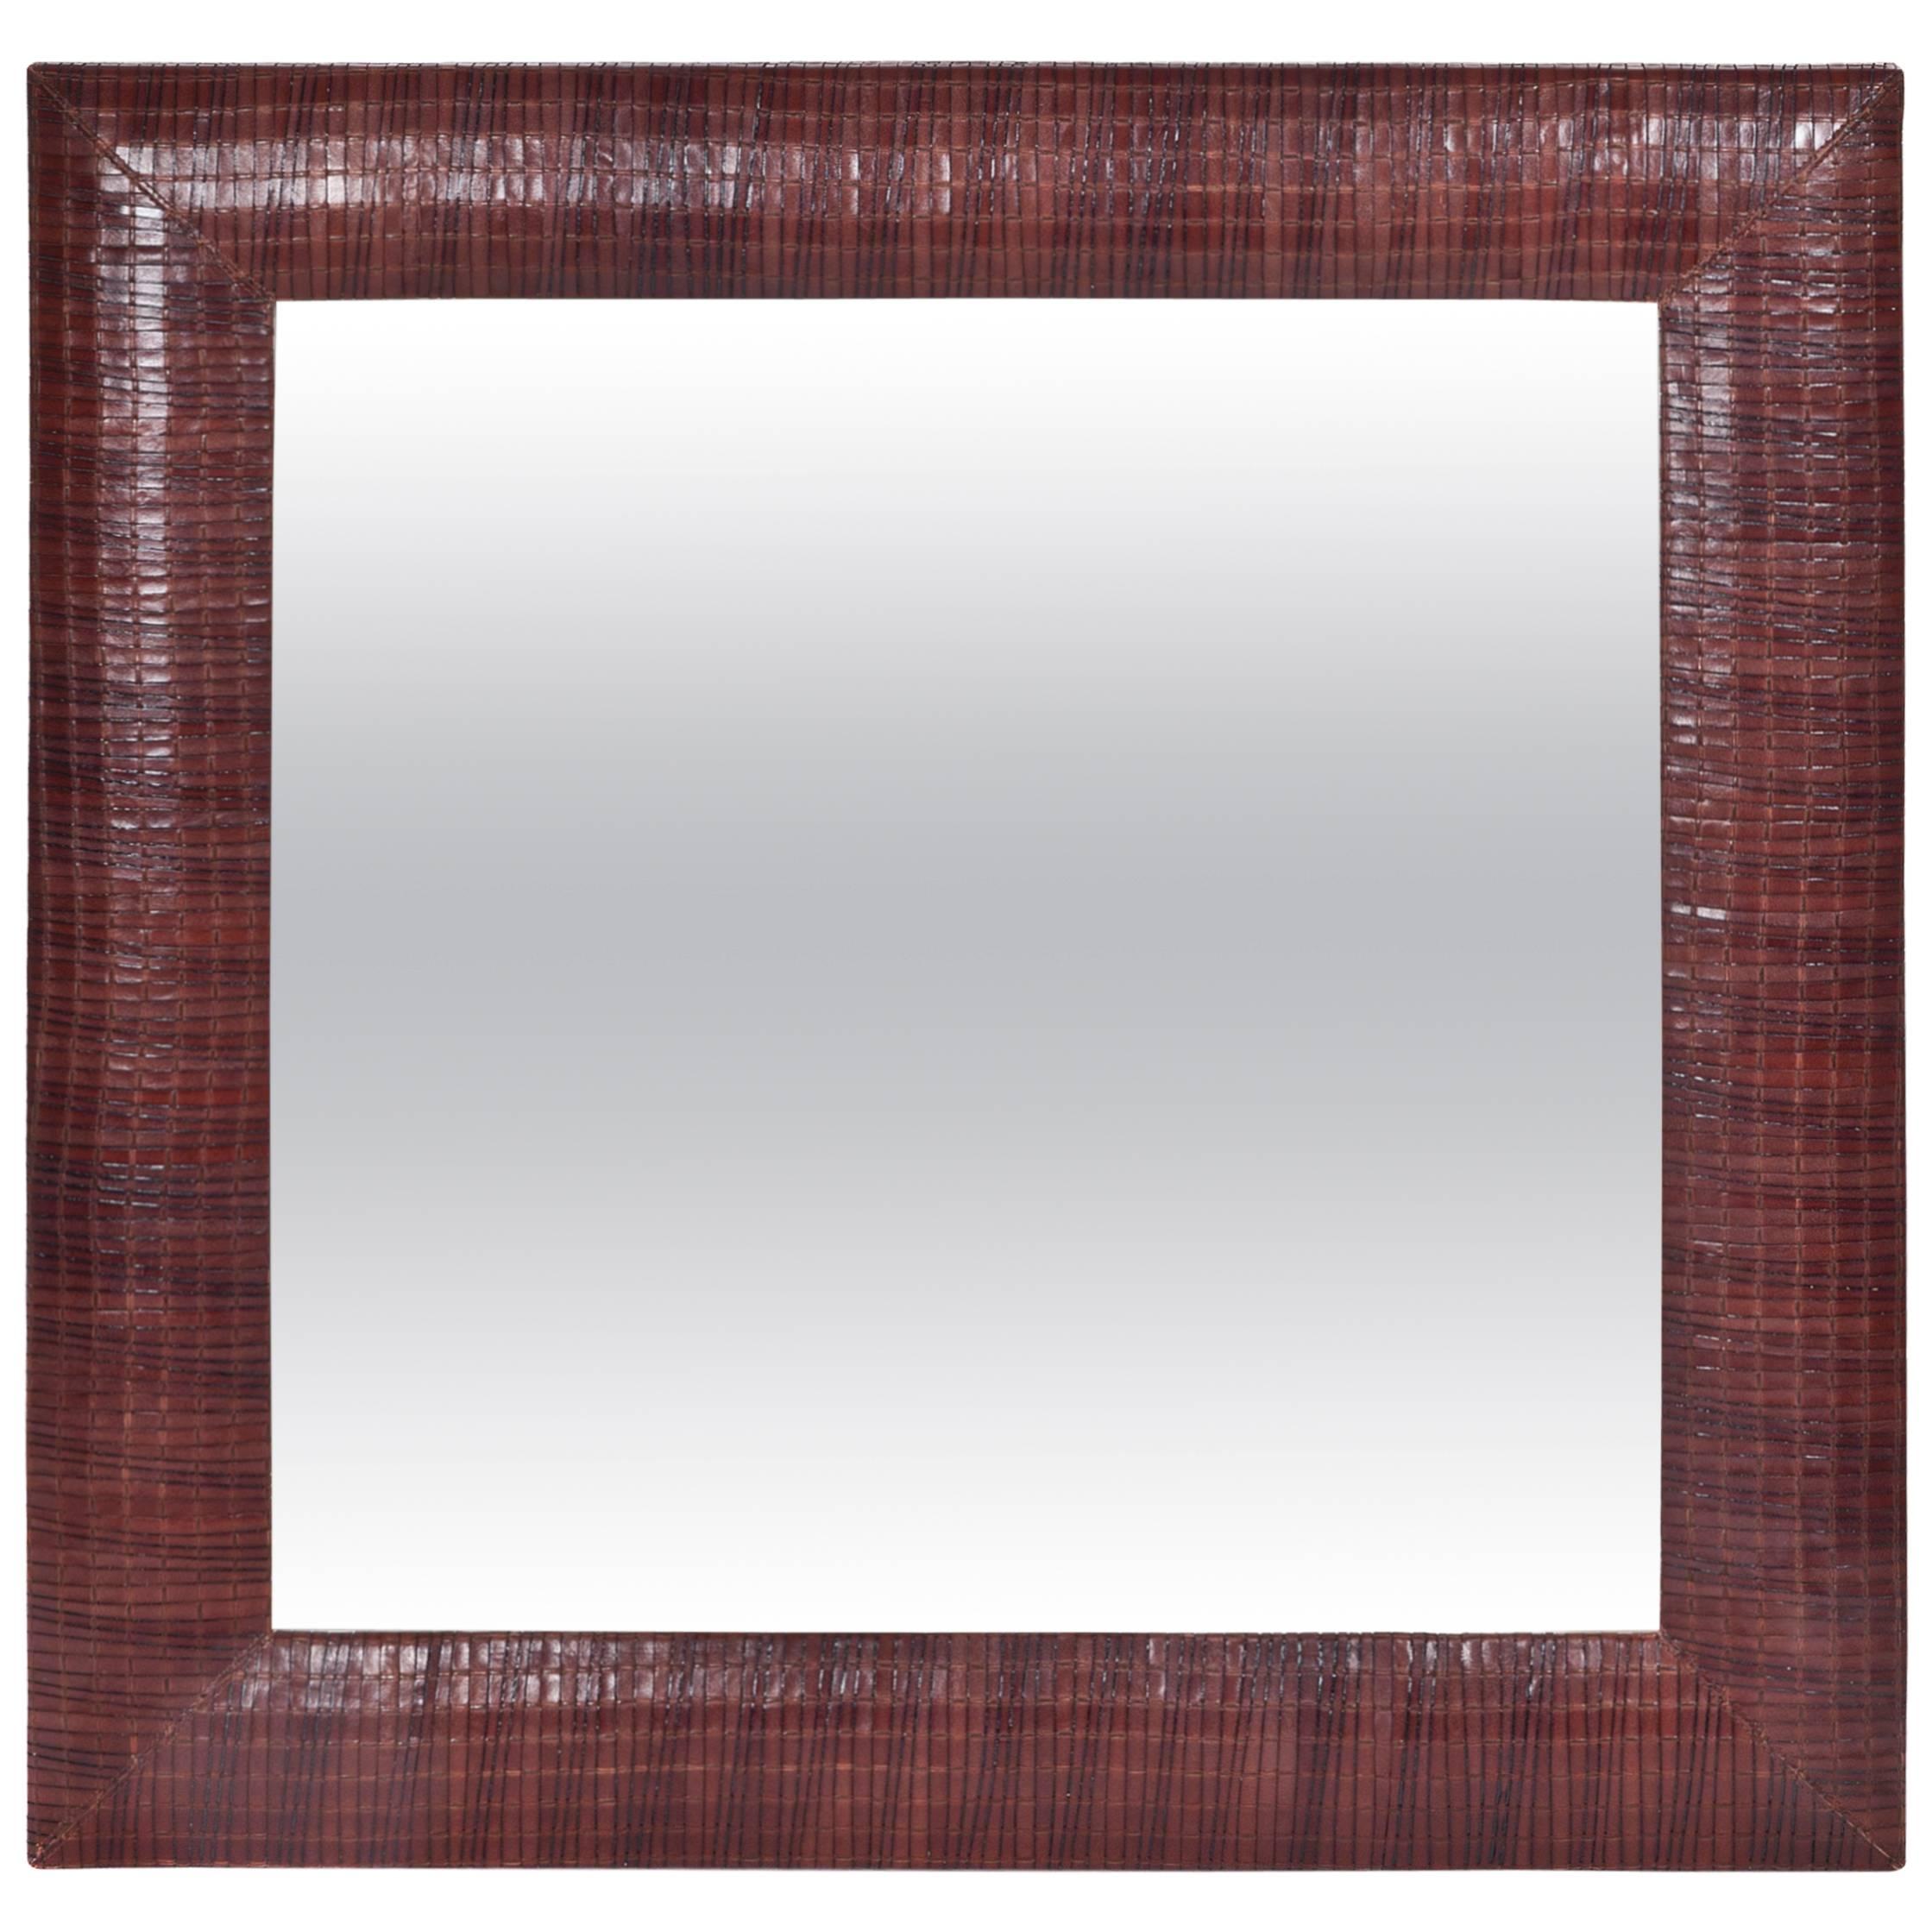 Hand-Woven Leather Framed Beveled Mirror